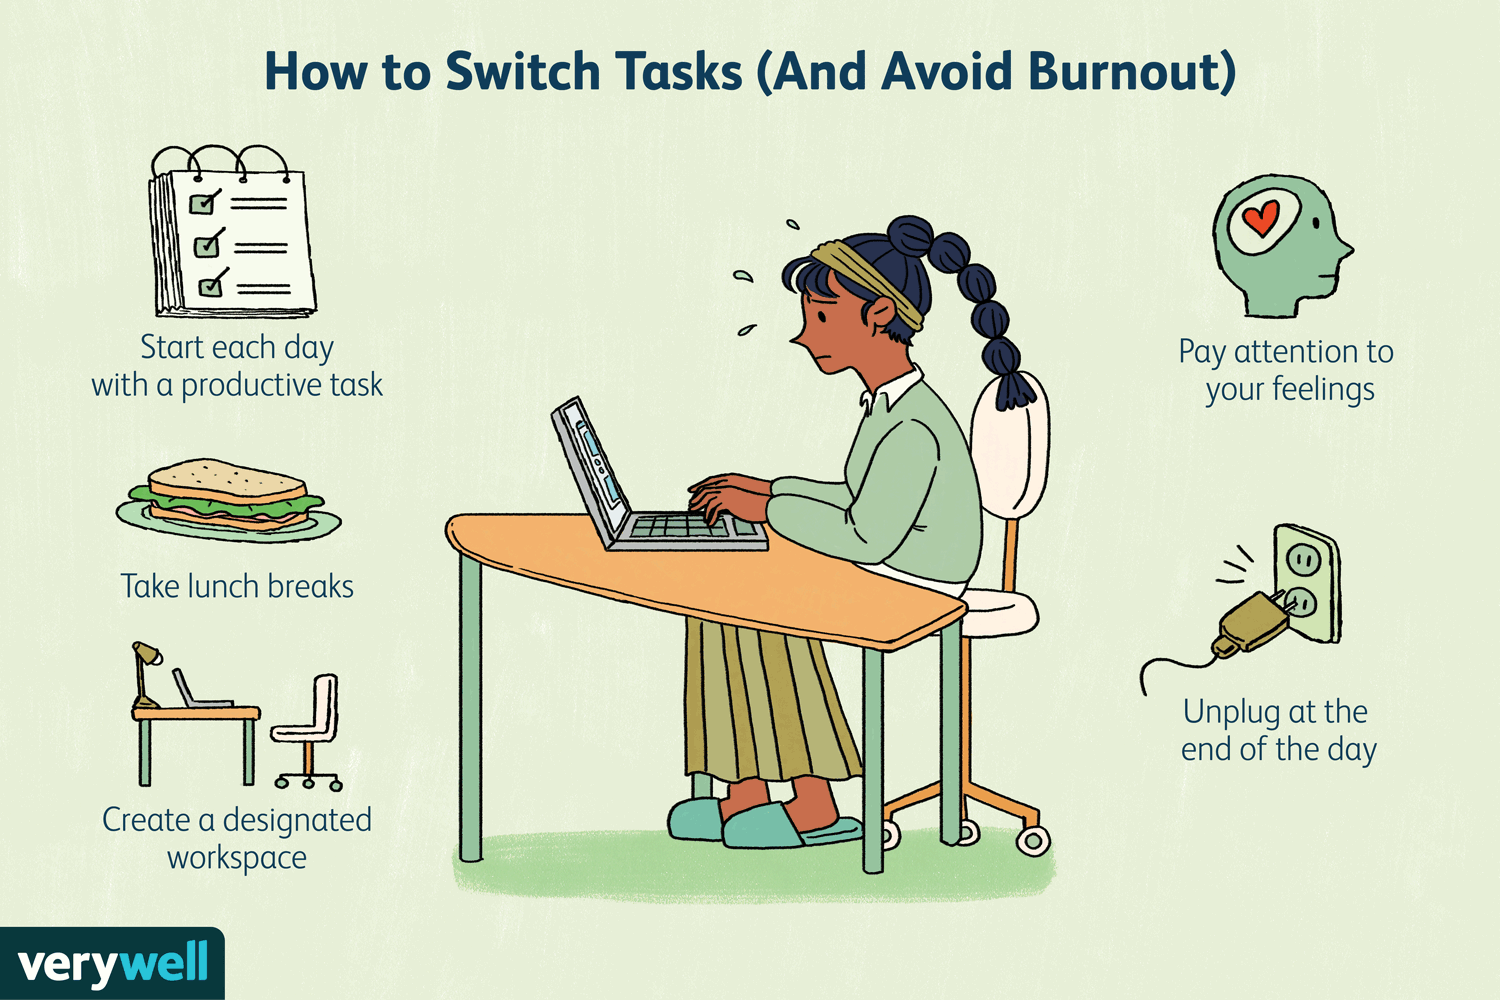 The Best Way to Switch Tasks to Avoid Burnout